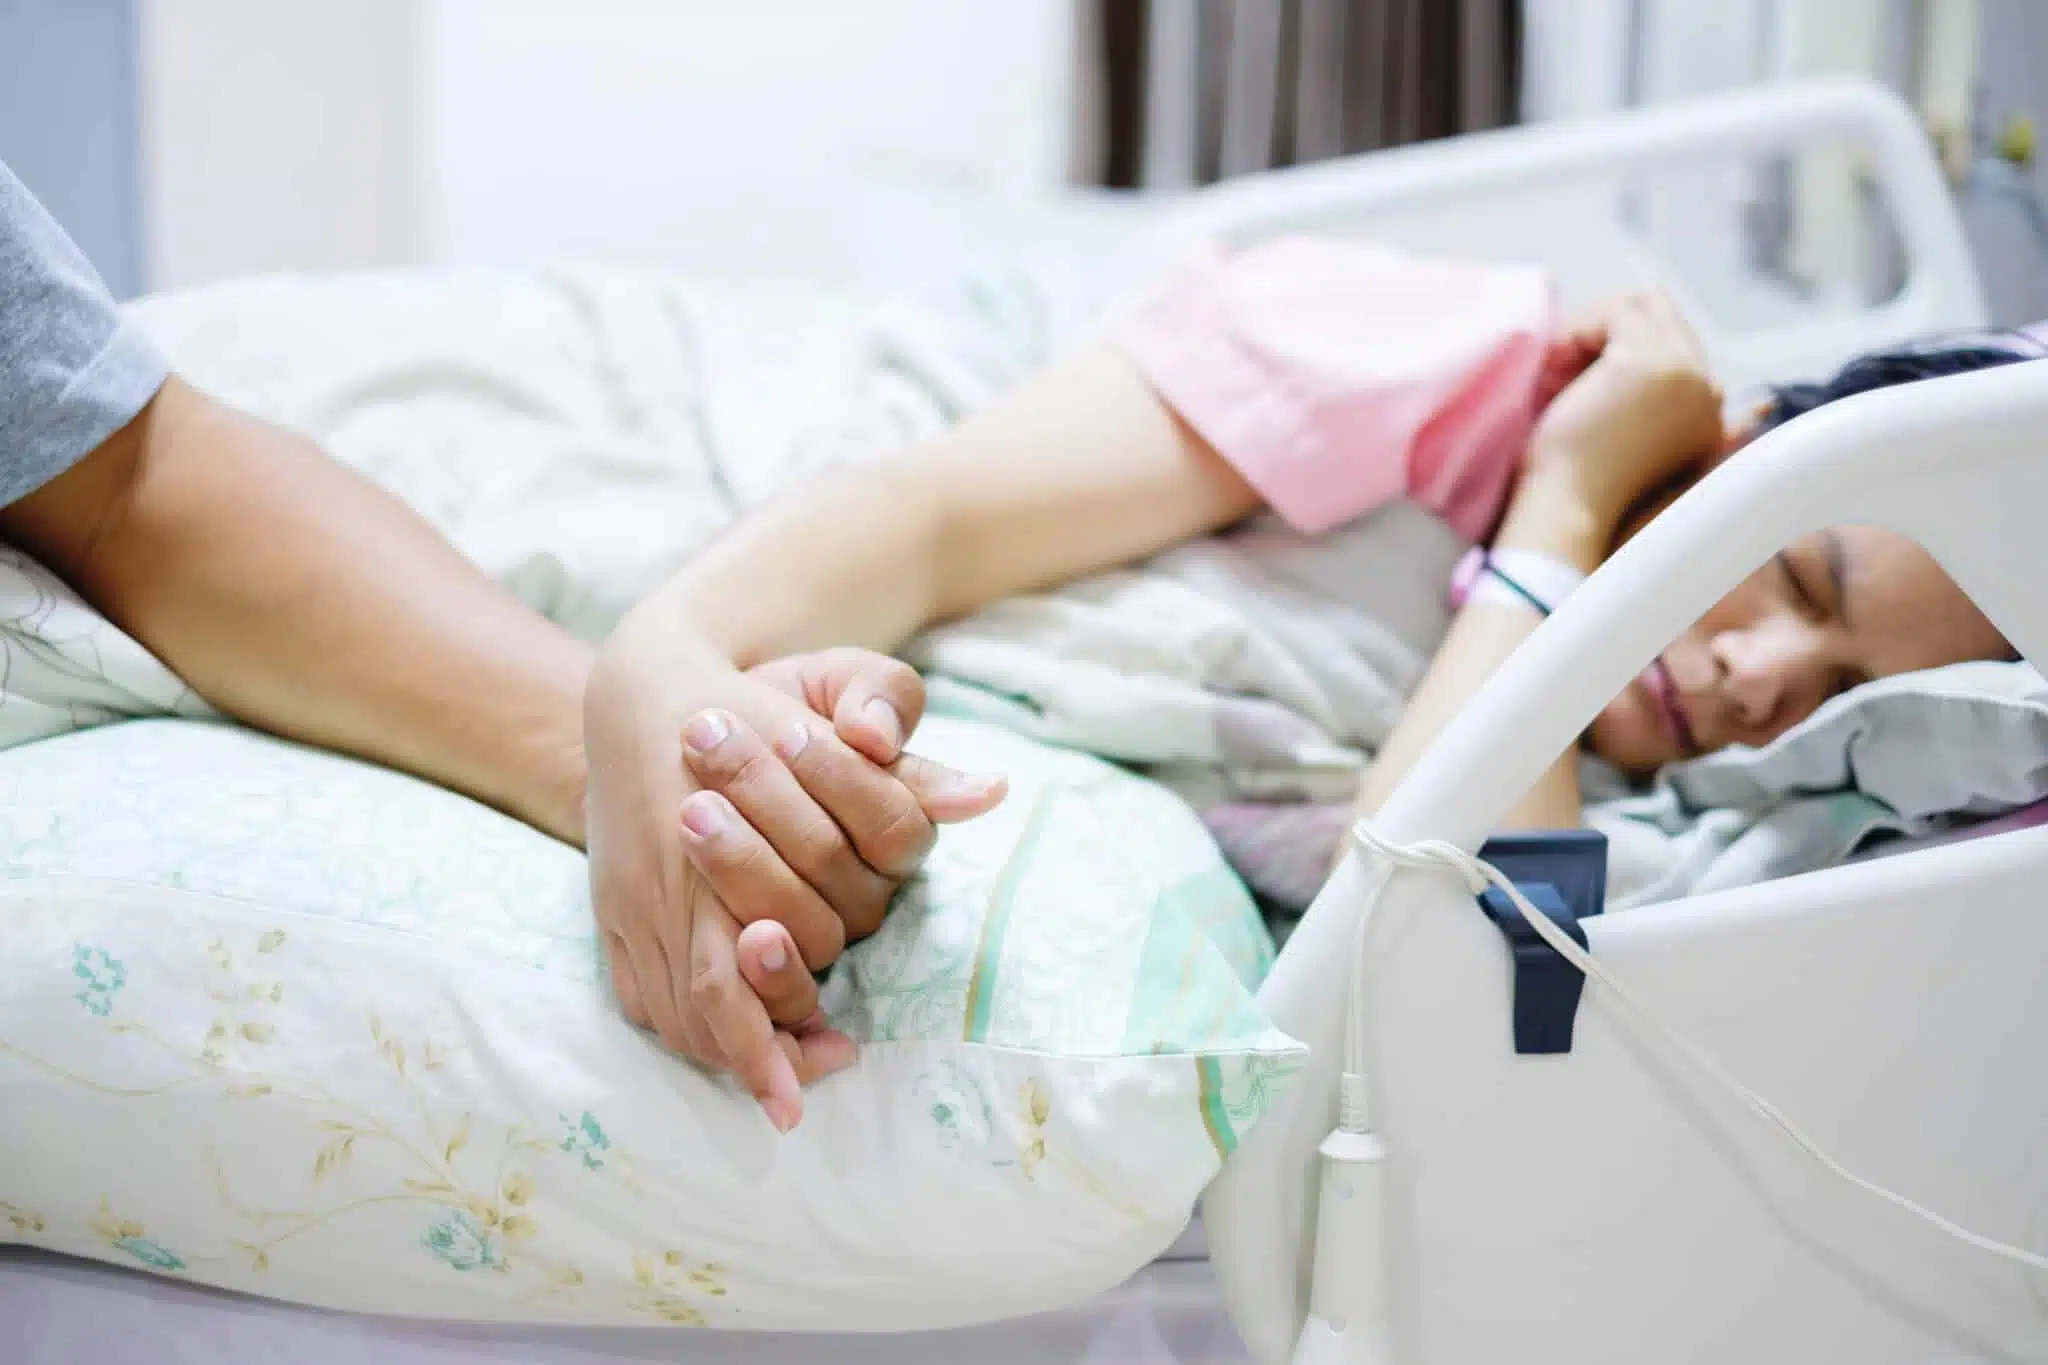 Hand of man hold hands with woman on the hospital bed